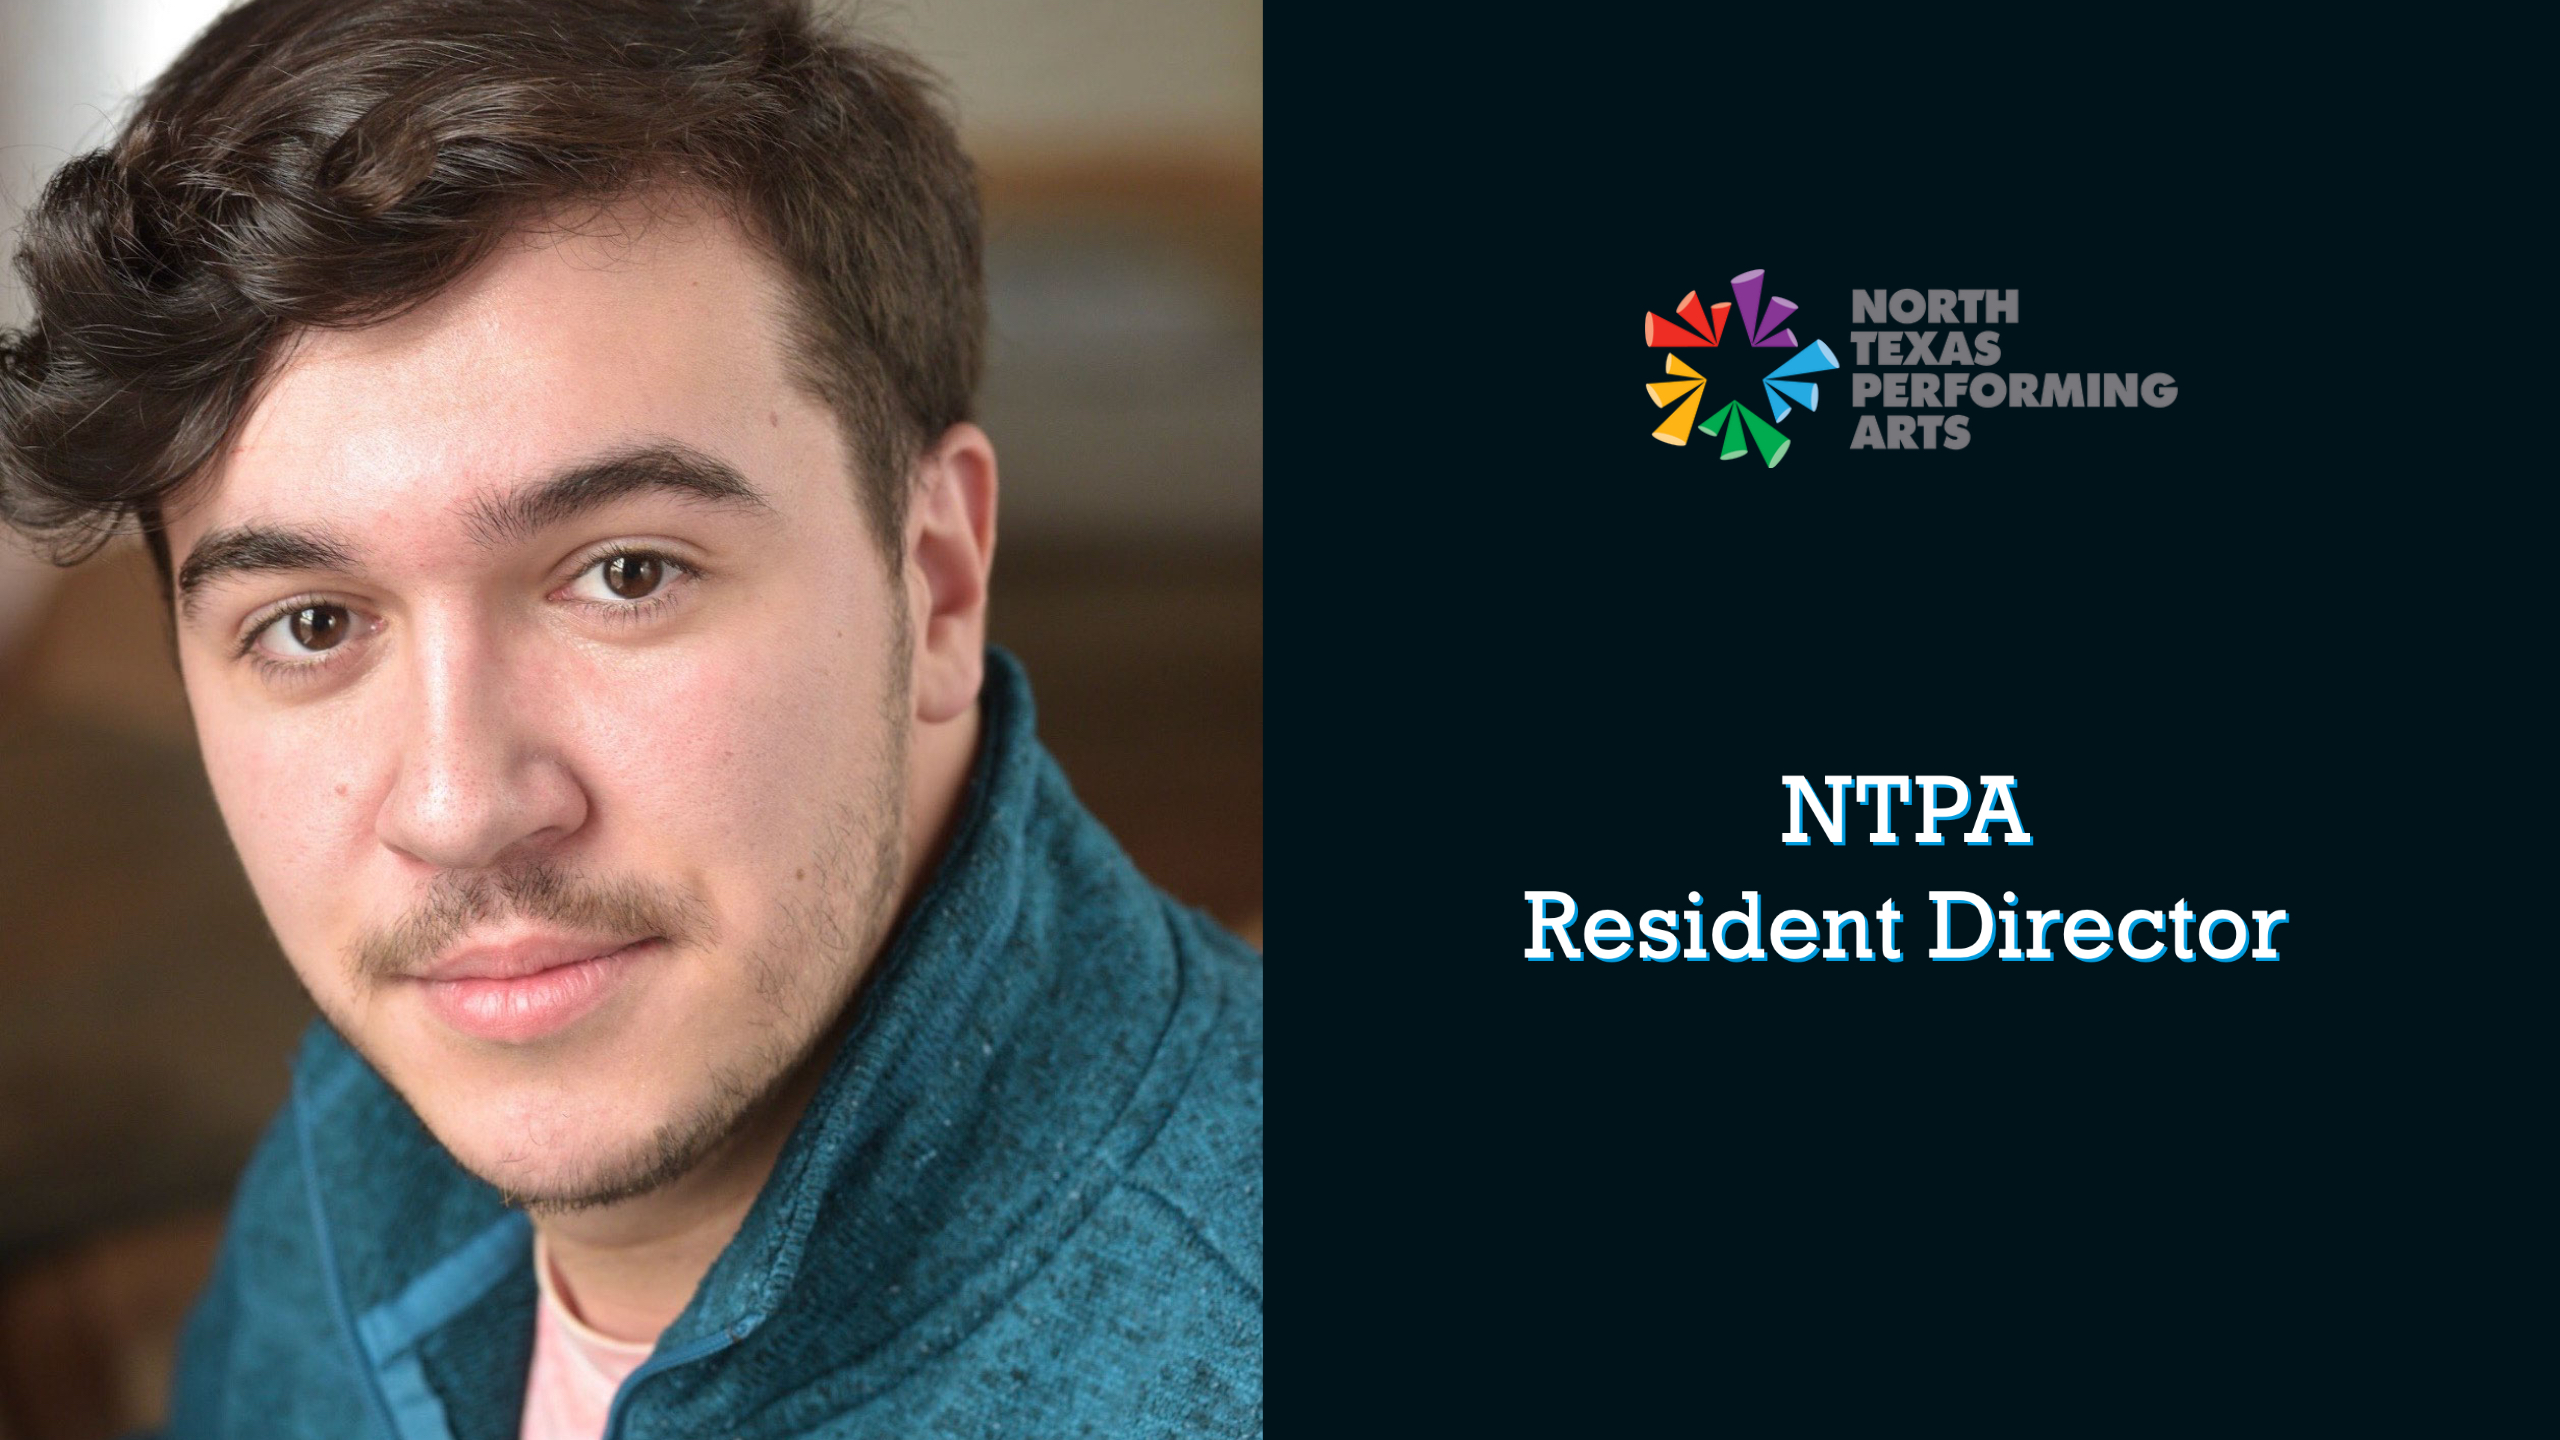 NTPA Announces Austin Hines as Resident Director